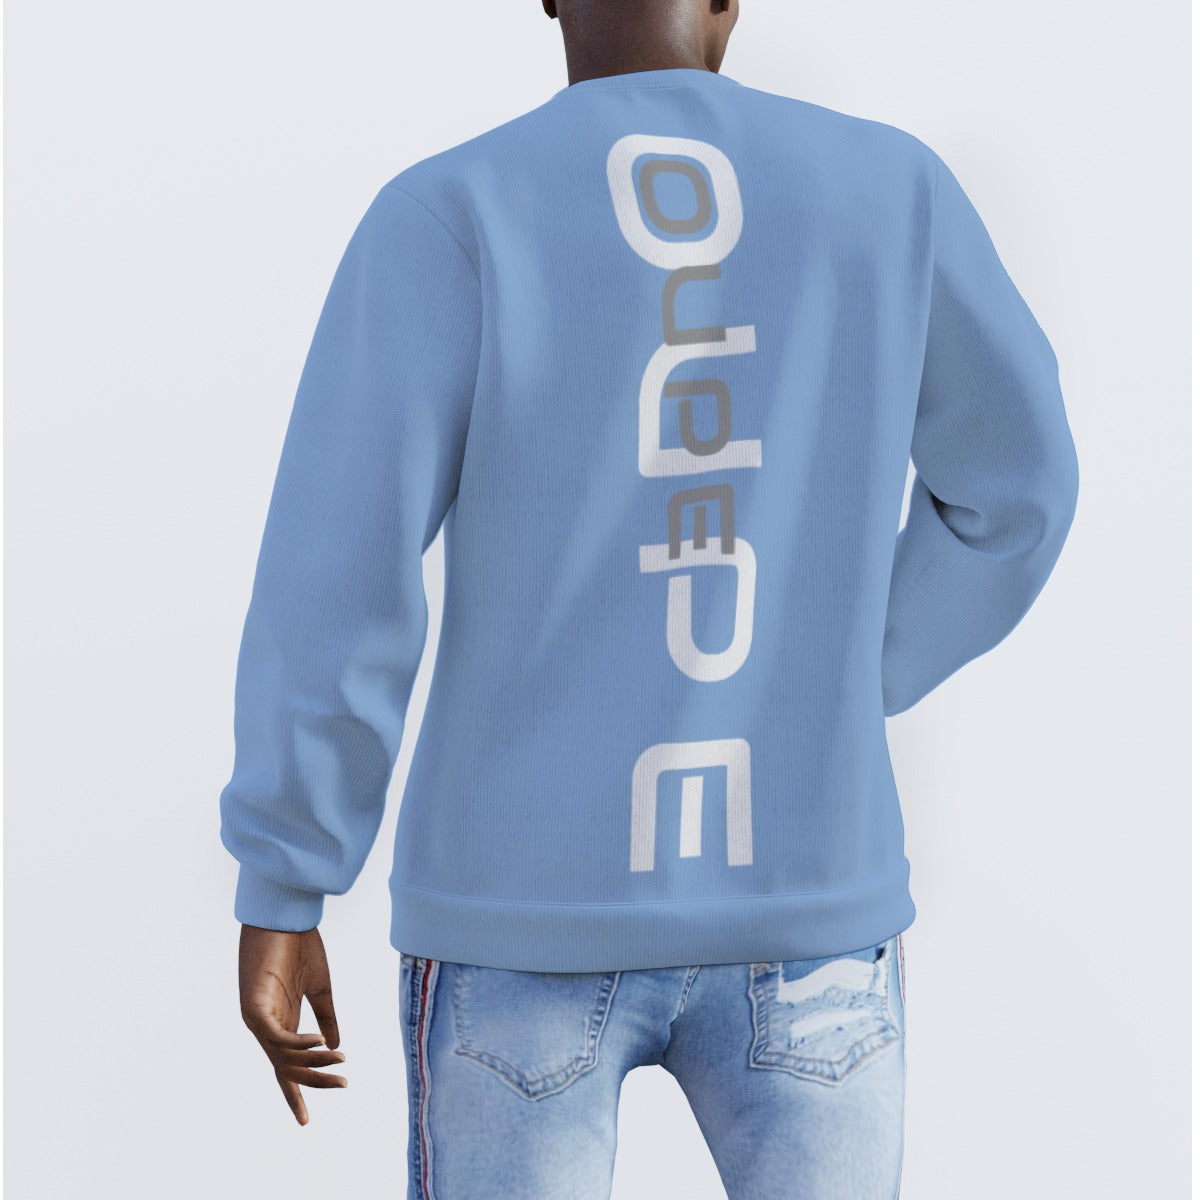 BLUE OUPE OUPE Men's Sweater